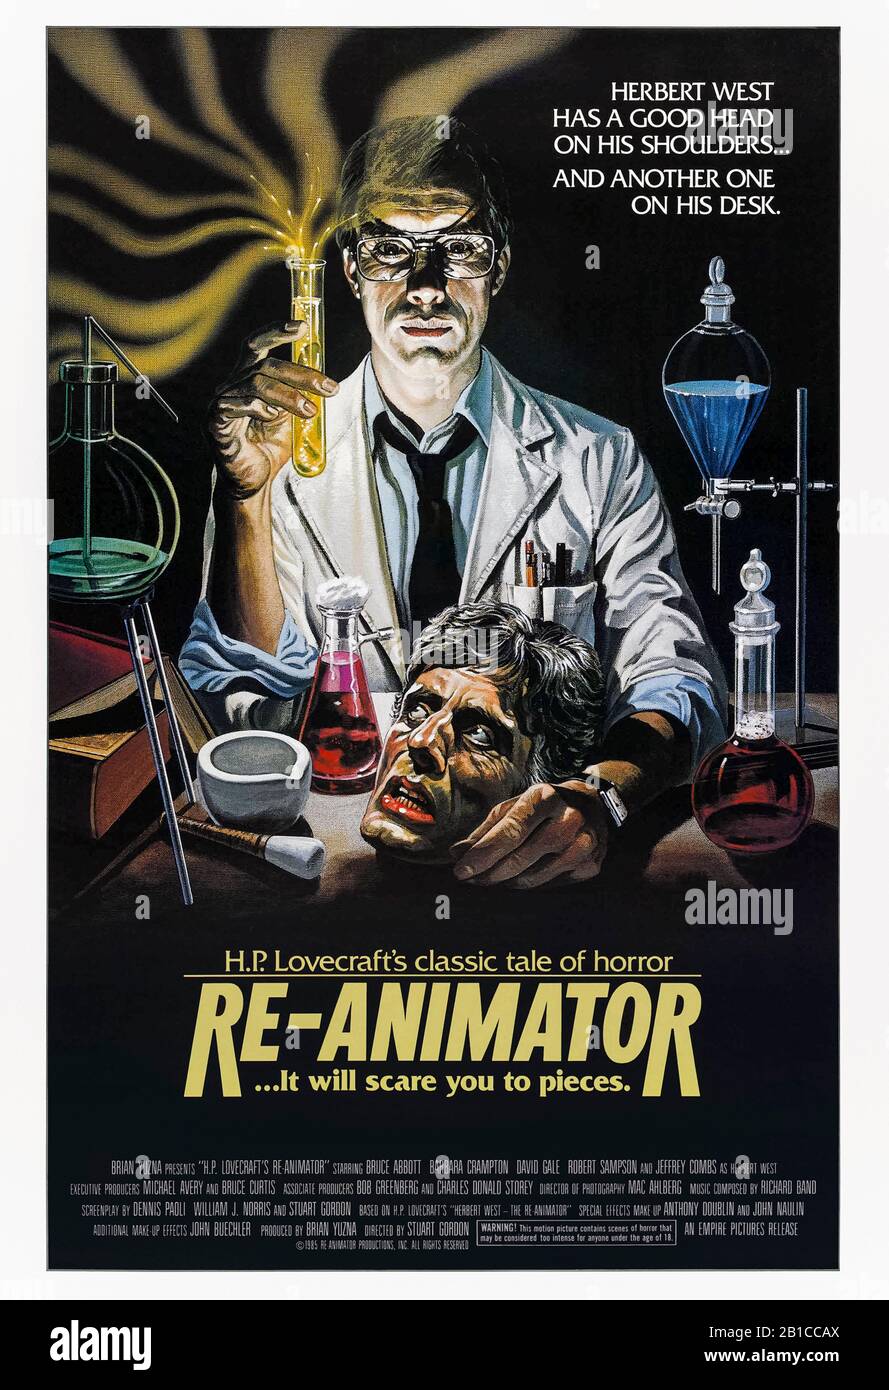 Re-Animator (1985) directed by Stuart Gordon and starring Jeffrey Combs, Bruce Abbott, Barbara Crampton and David Gale. H.P. Lovecraft's classic tale of horror about a mad scientist who re-animates dead tissue. Stock Photo